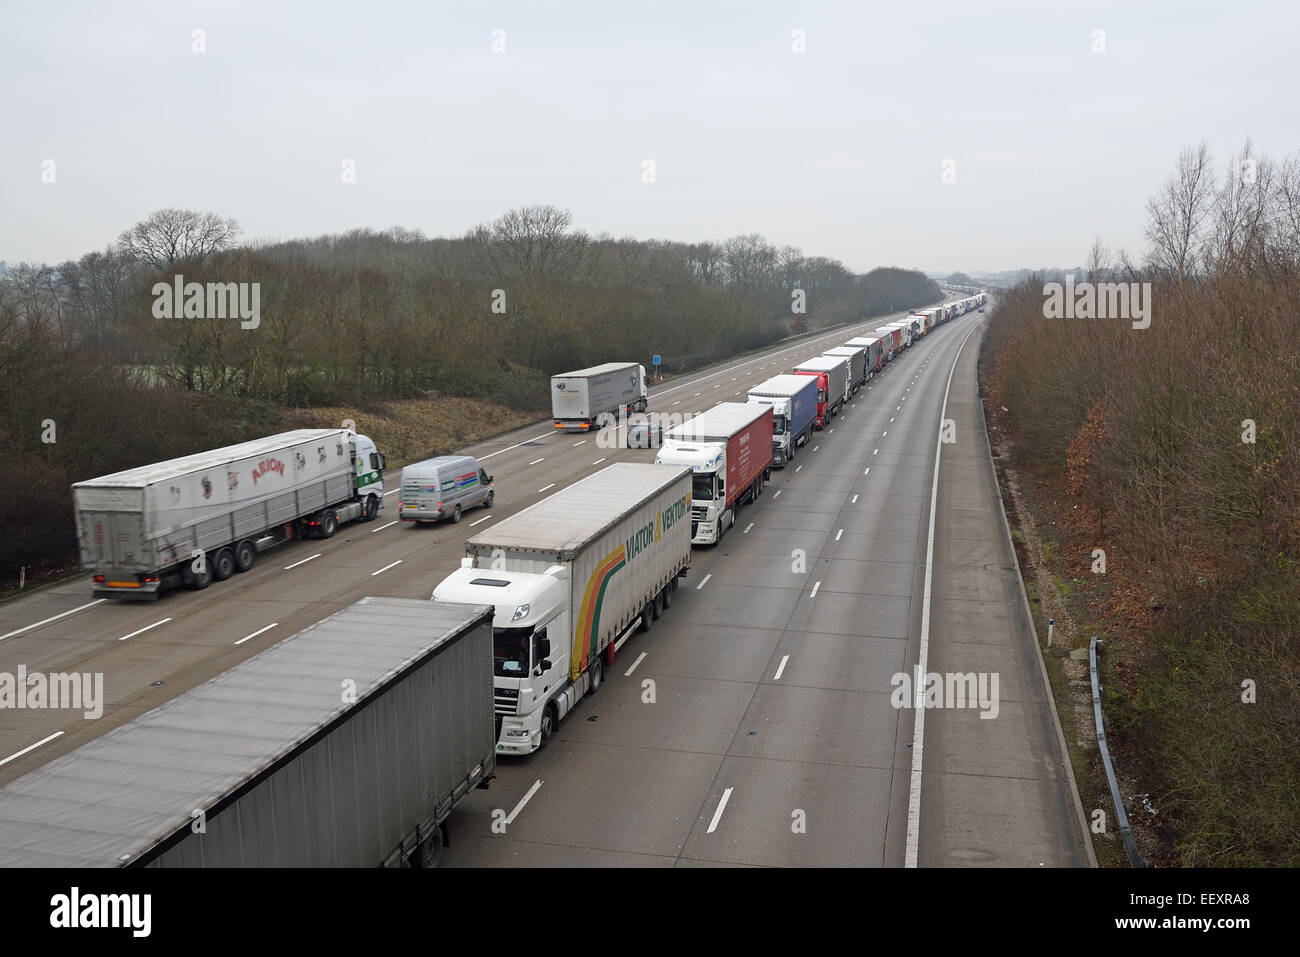 Ashford, Kent, UK. 23rd Jan, 2015. Phase 2 of Operation Stack continues today owing to delays in the Channel Tunnel.  The Operation involves freight vehicles being stacked on the coastbound M20 motorway between Junctions 8 and 9 pending police permission to proceed.  Other traffic travelling towards the coast is routed via the A20 whilst the London bound carriageway is currently unaffected. Severe delays are reported and the Operation is set to continue through the weekend. Credit:  Paul Martin/Alamy Live News Stock Photo